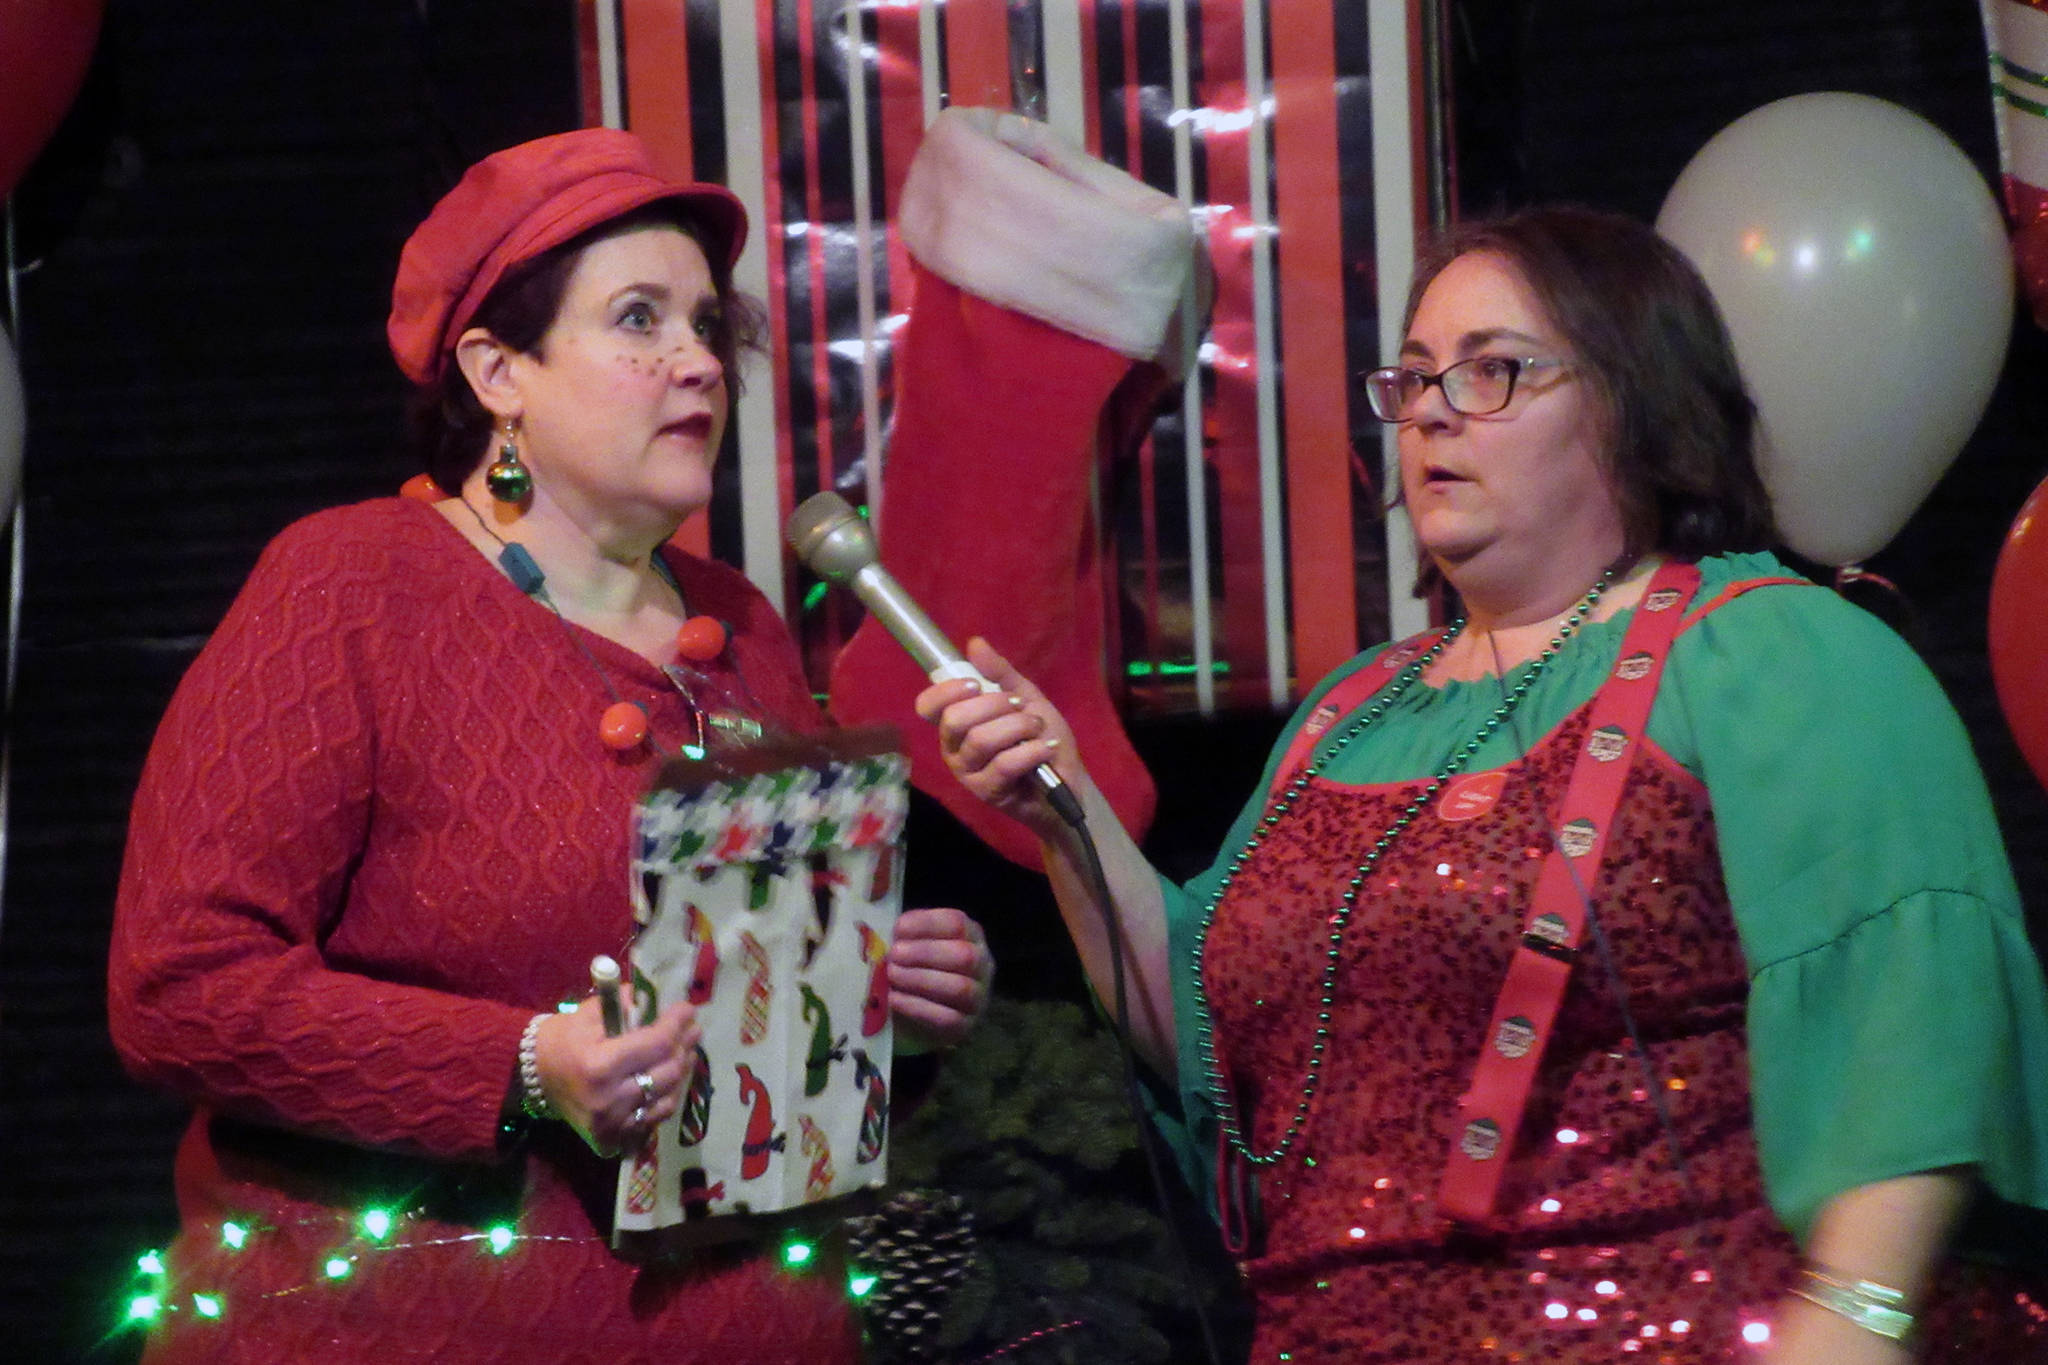 Amy Dressel talks to boss elf Collette Costa about how they’re going to bail reindeer out of jail during a slightly belated Christmas extravaganza at the Gold Town Theater Saturday, Jan. 5, 2019. (Ben Hohenstatt | Capital City Weekly)